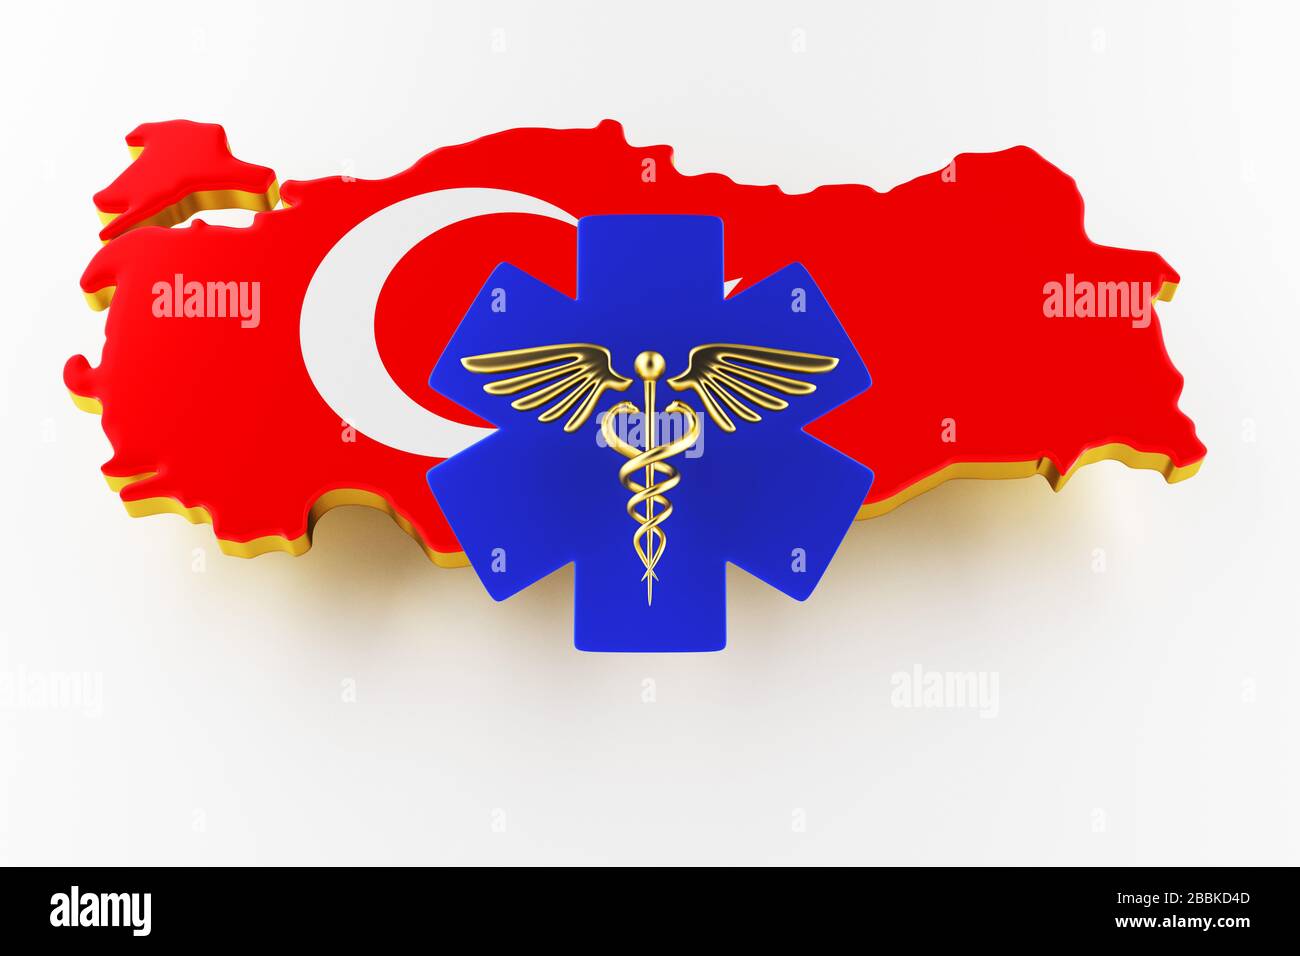 Caduceus sign with snakes on a medical star. Map of Turkey land border with flag. Turkey map on white background. 3d rendering Stock Photo